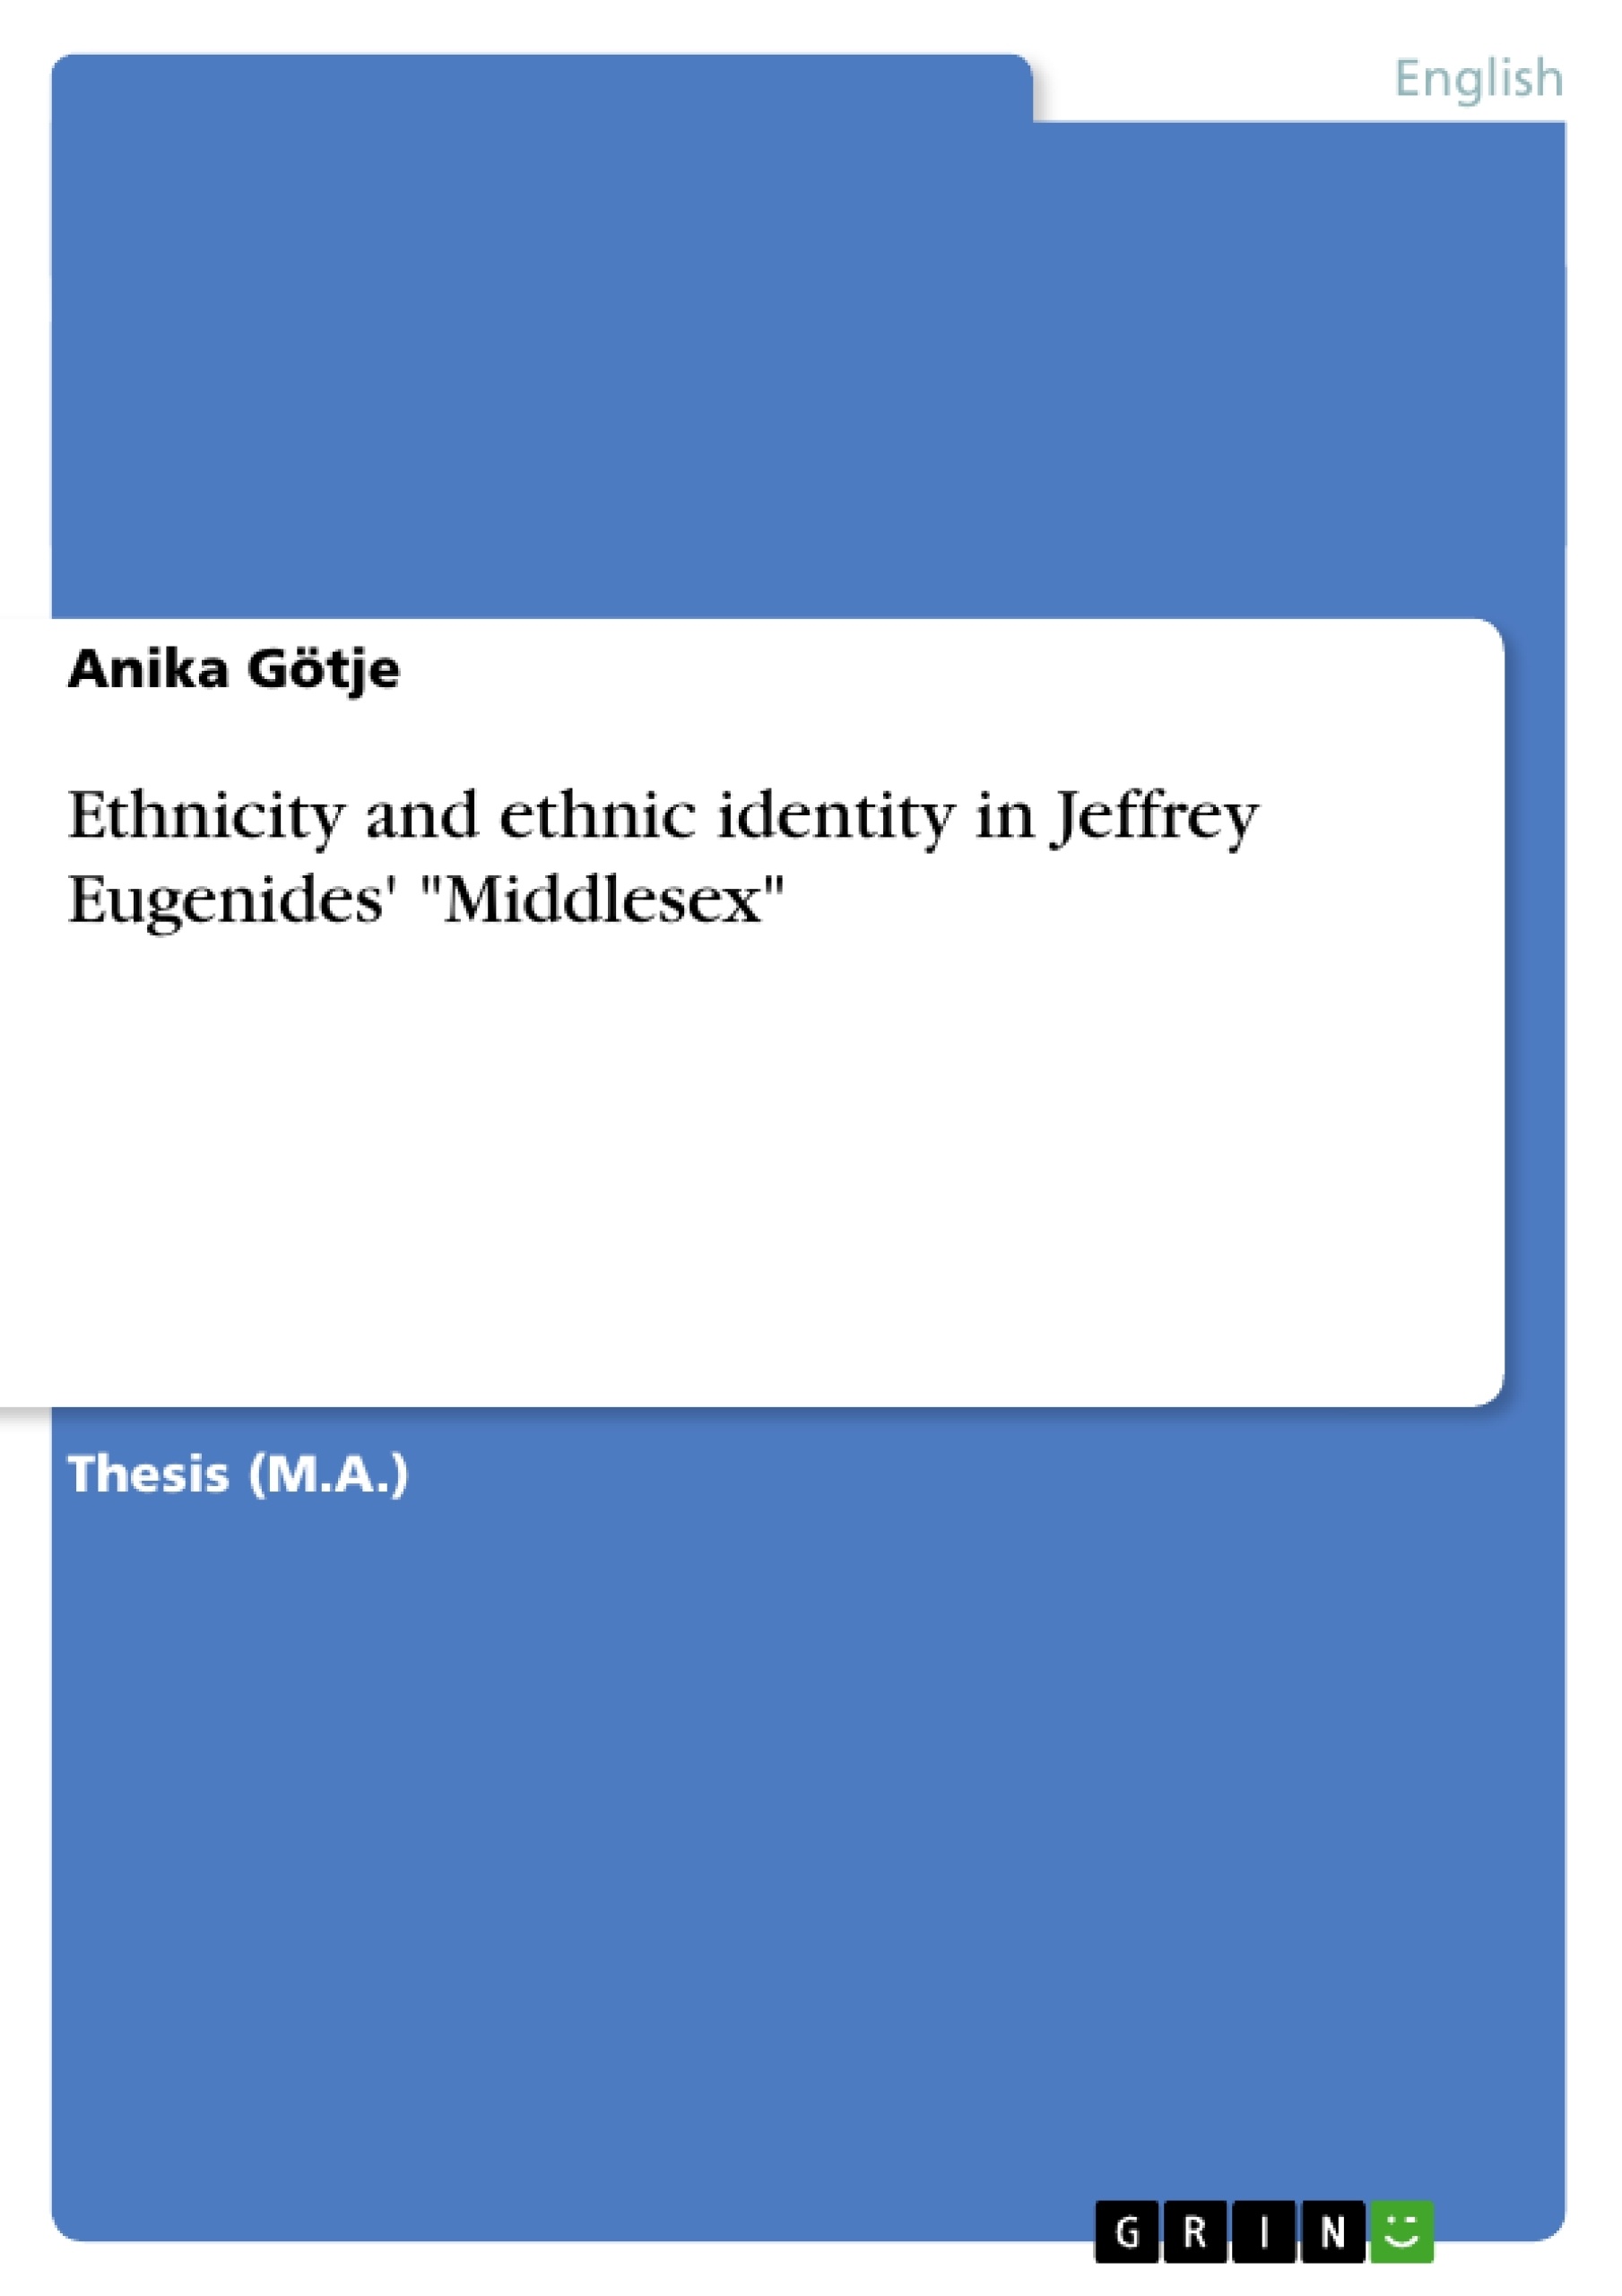 Titre: Ethnicity and ethnic identity in Jeffrey Eugenides' "Middlesex"